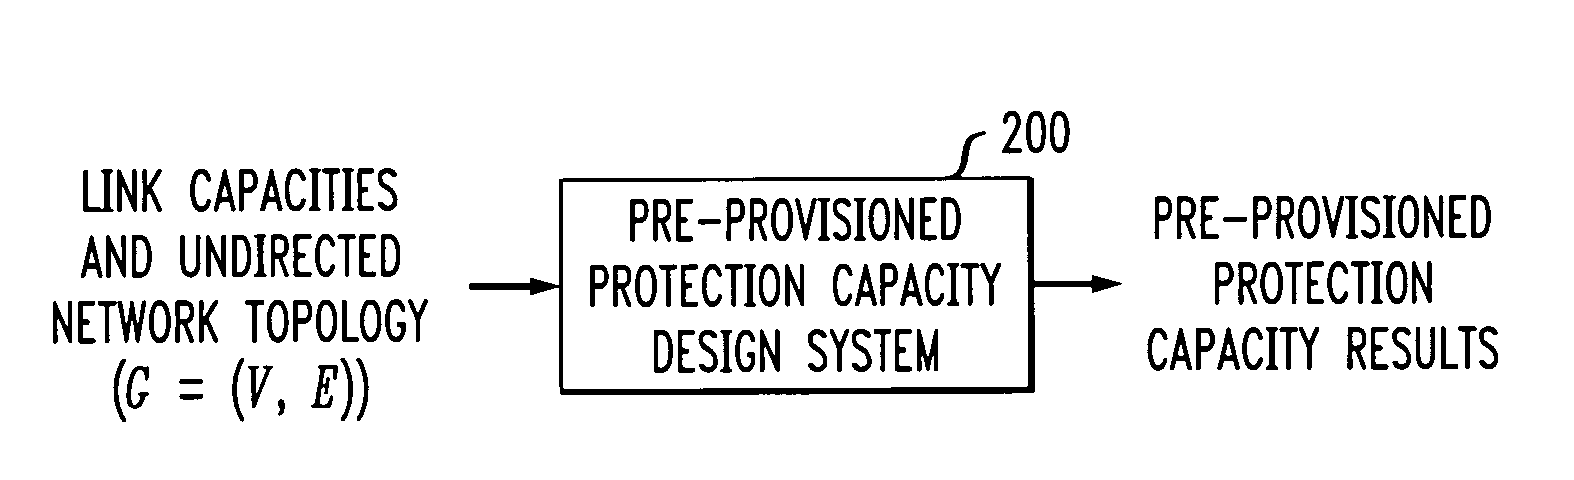 Method and apparatus for pre-provisioning networks to support fast restoration with minimum overbuild